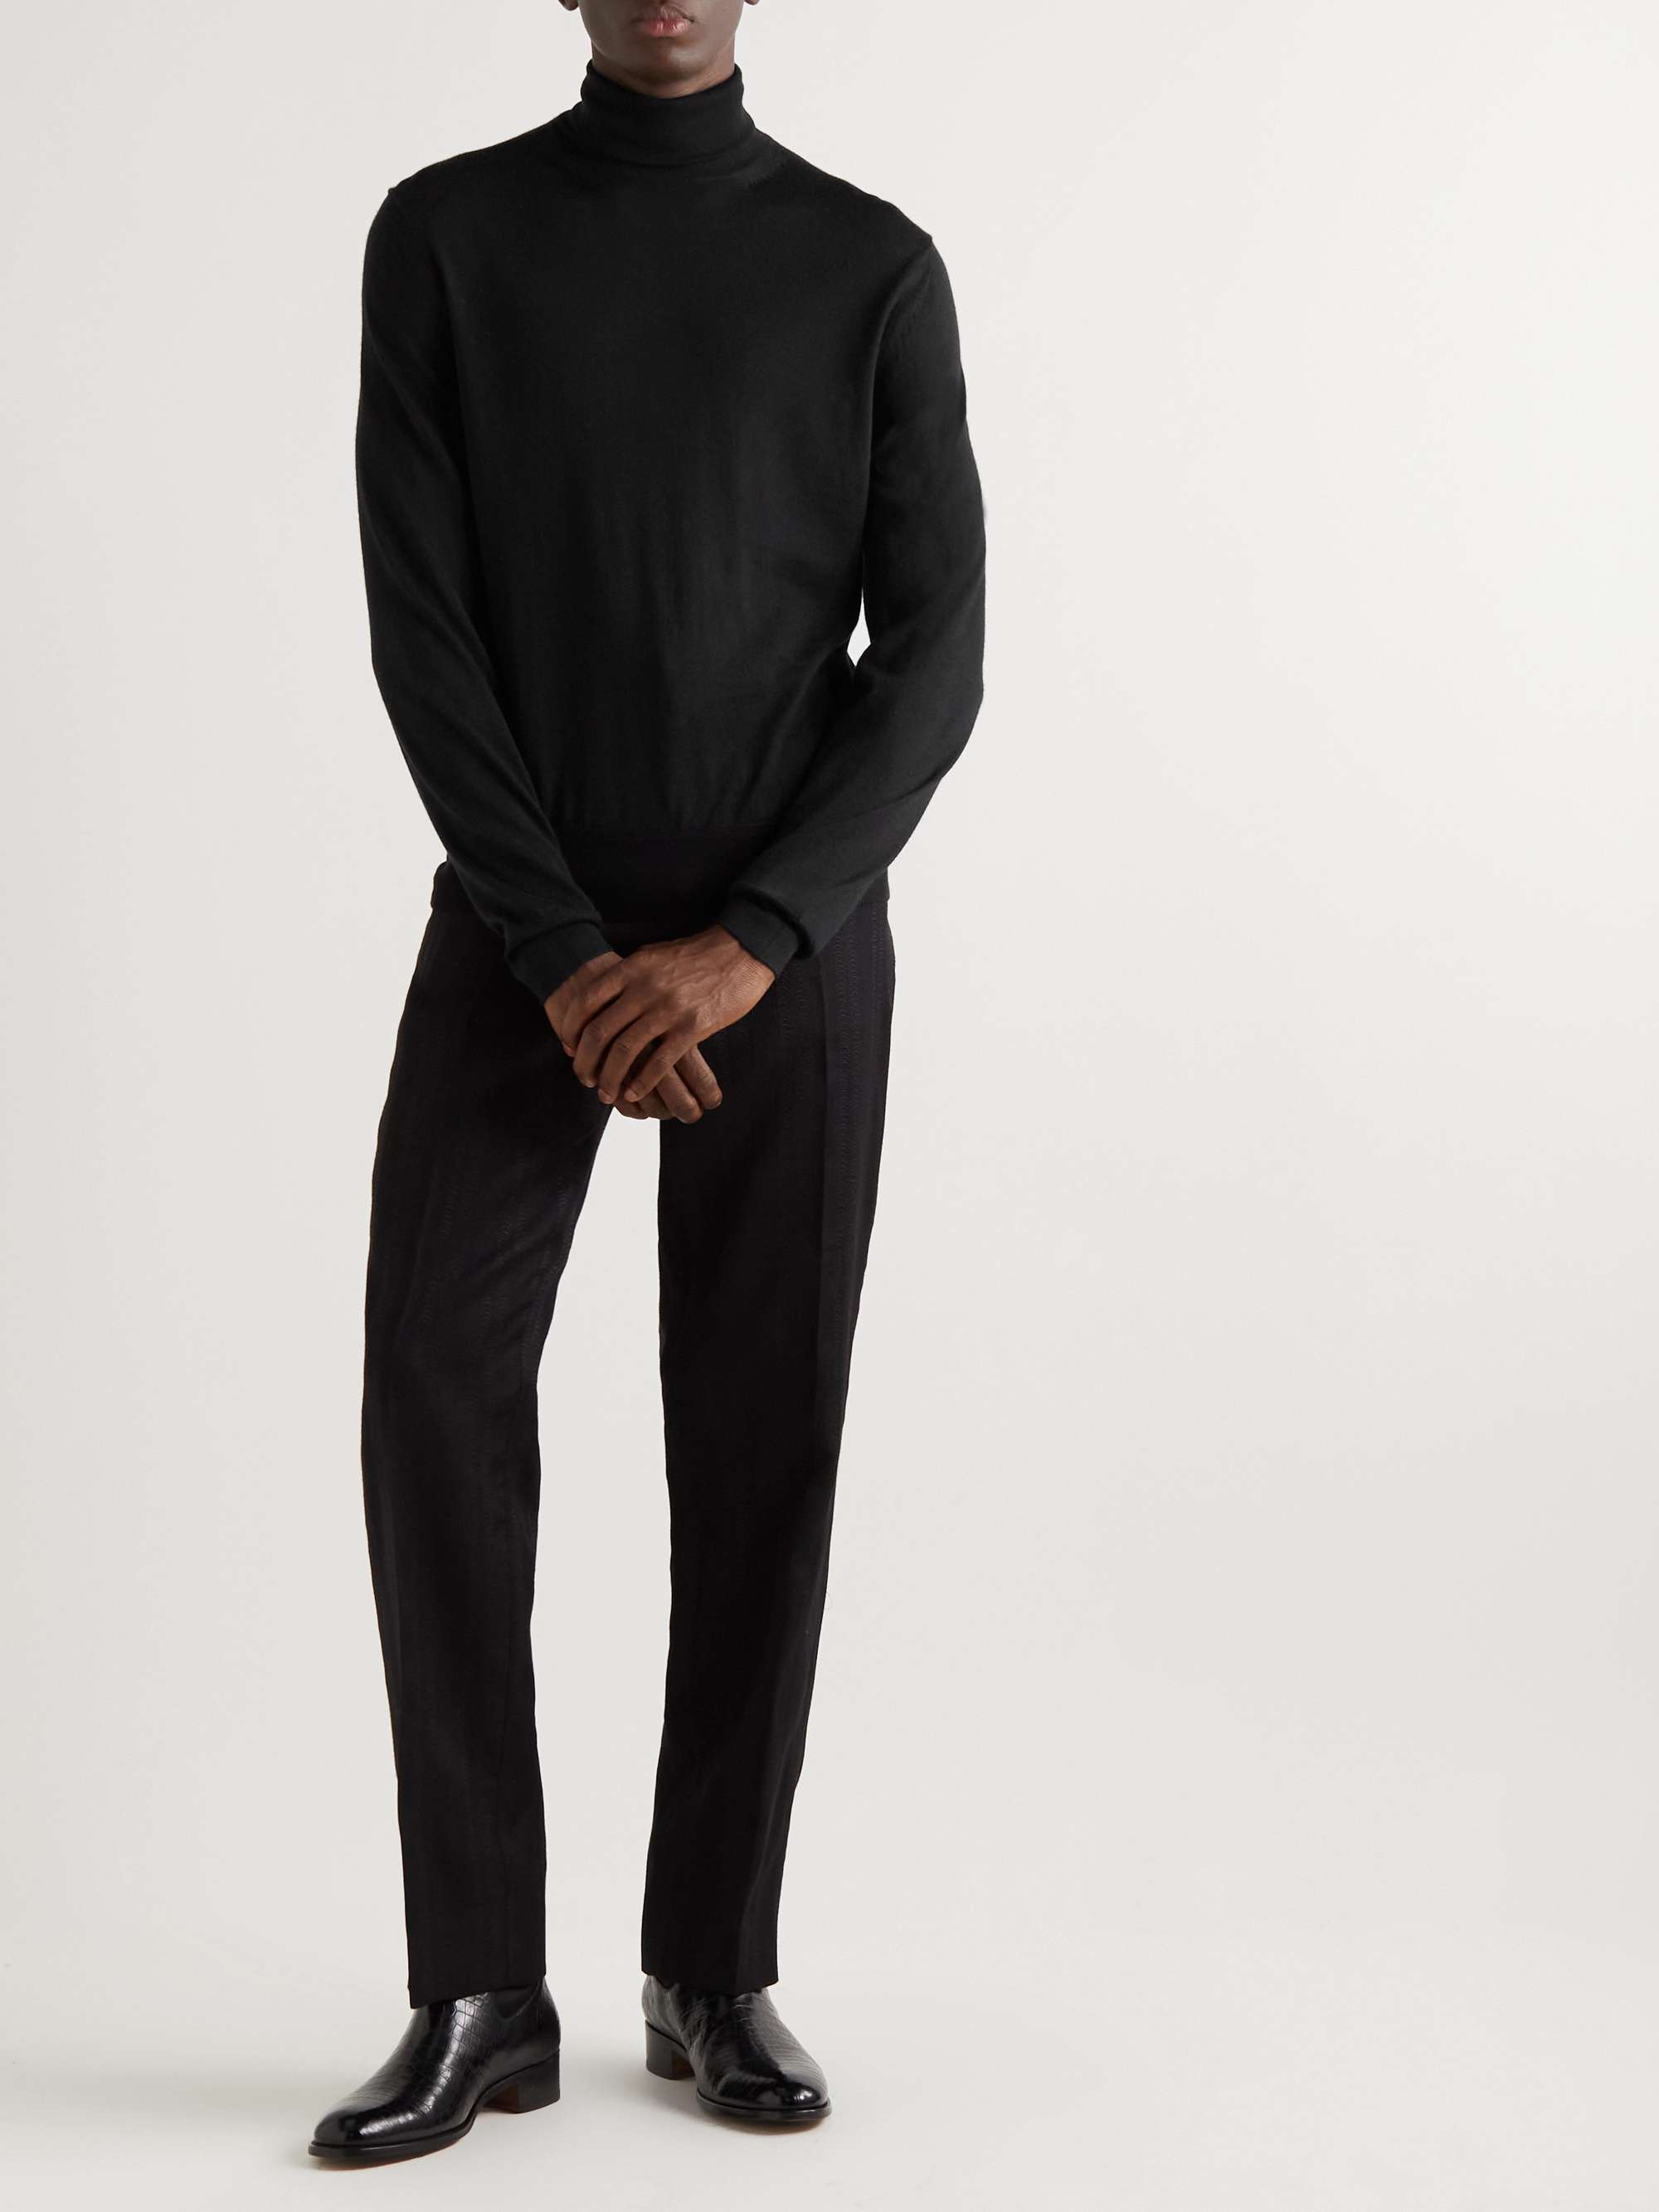 TOM FORD Cashmere and Silk-Blend Rollneck Sweater